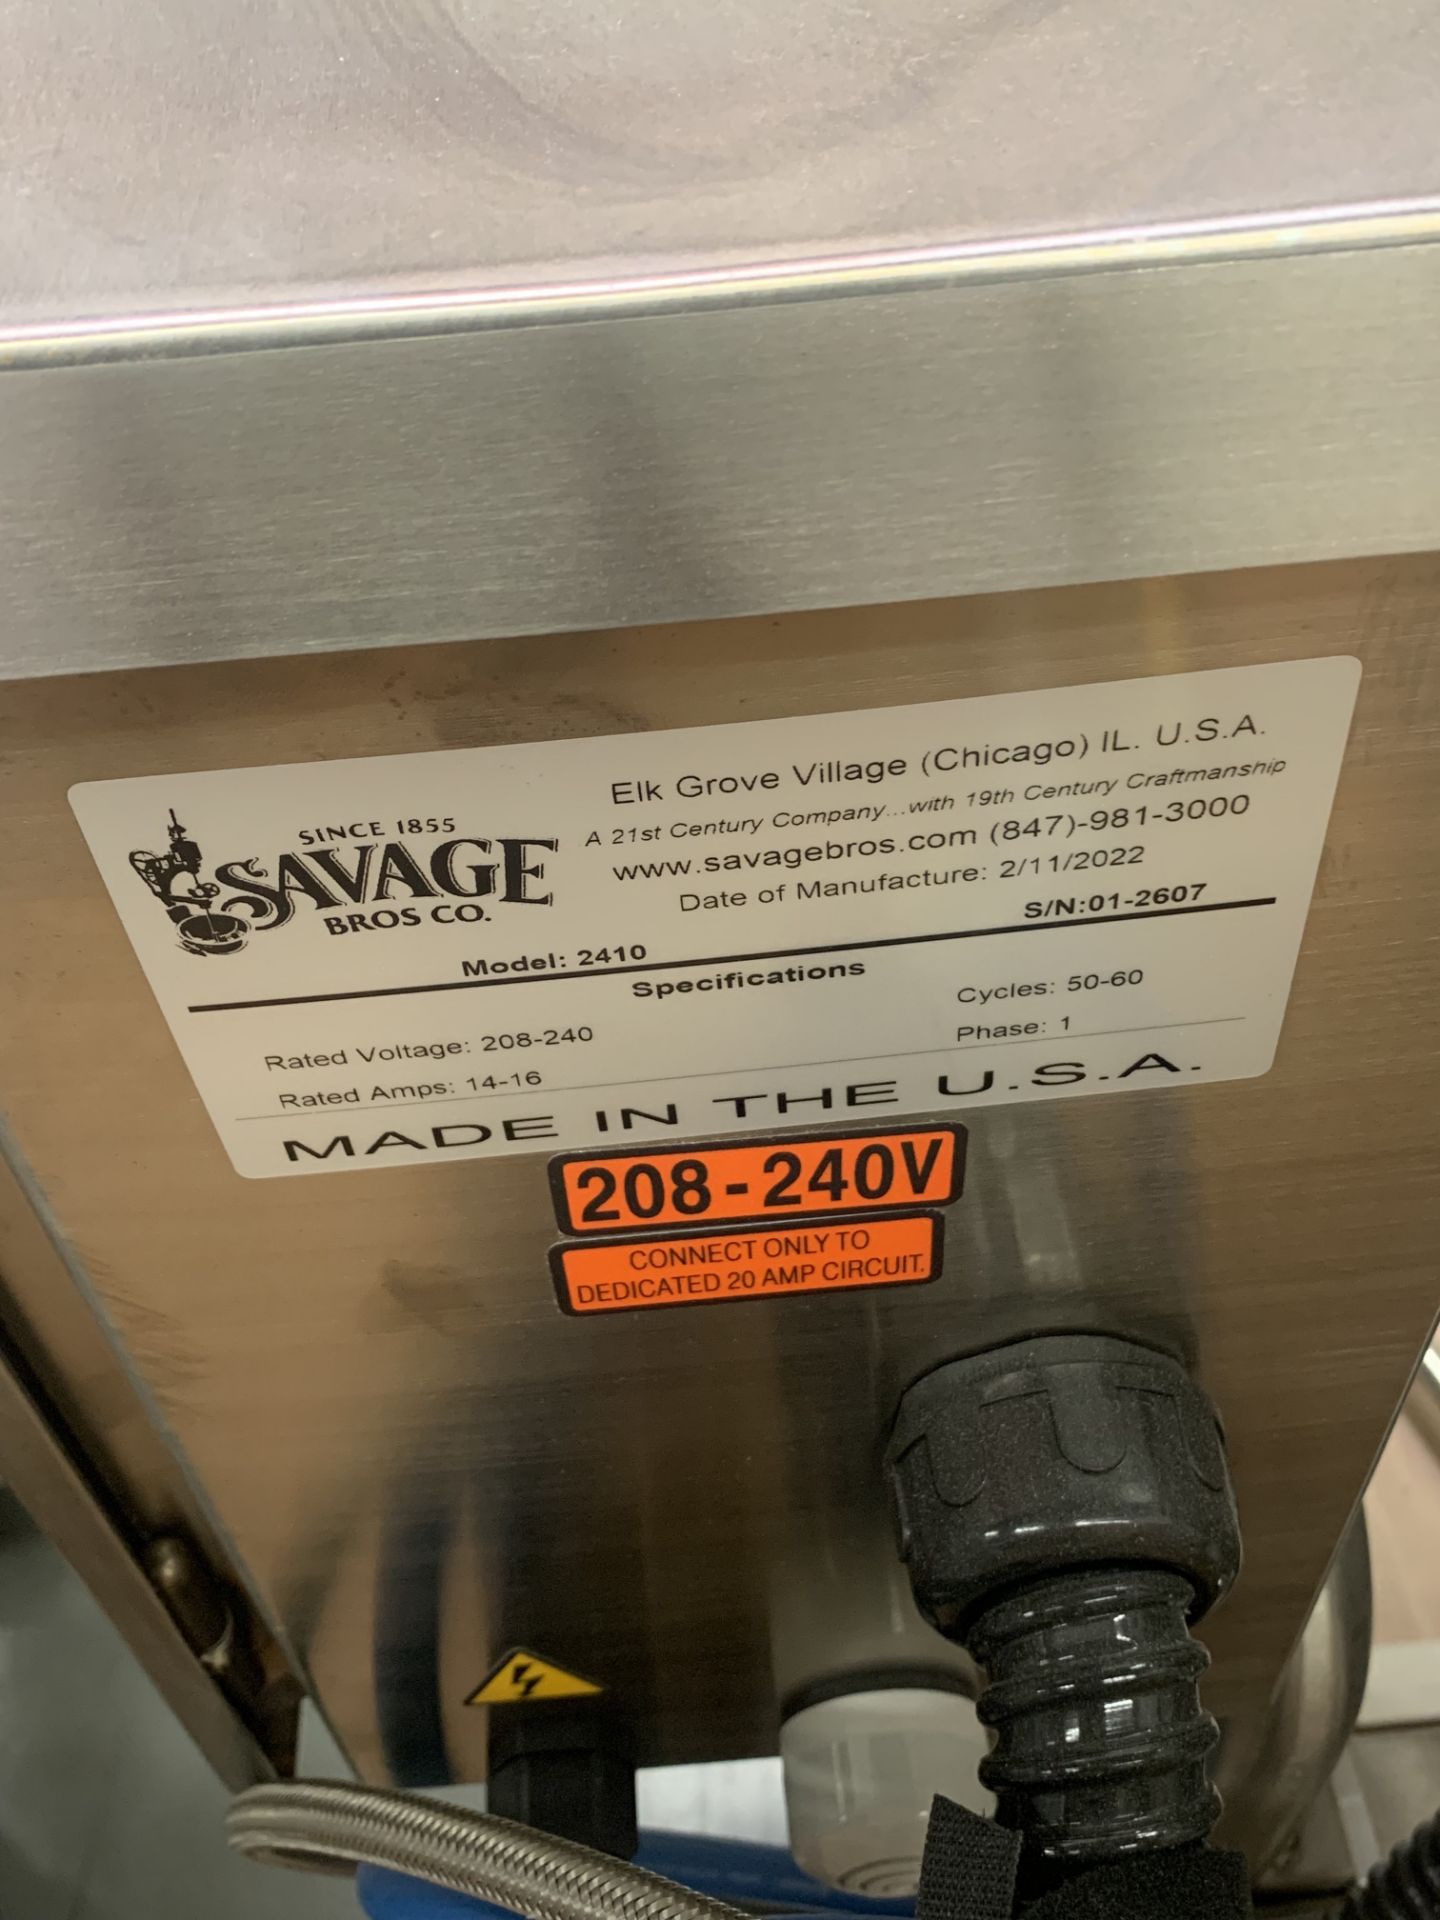 New/Unused Savage Bros Table-Top Automatic Cooker Mixer w/ PLC Control. Model 2410 / FireMixer-14 - Image 6 of 12